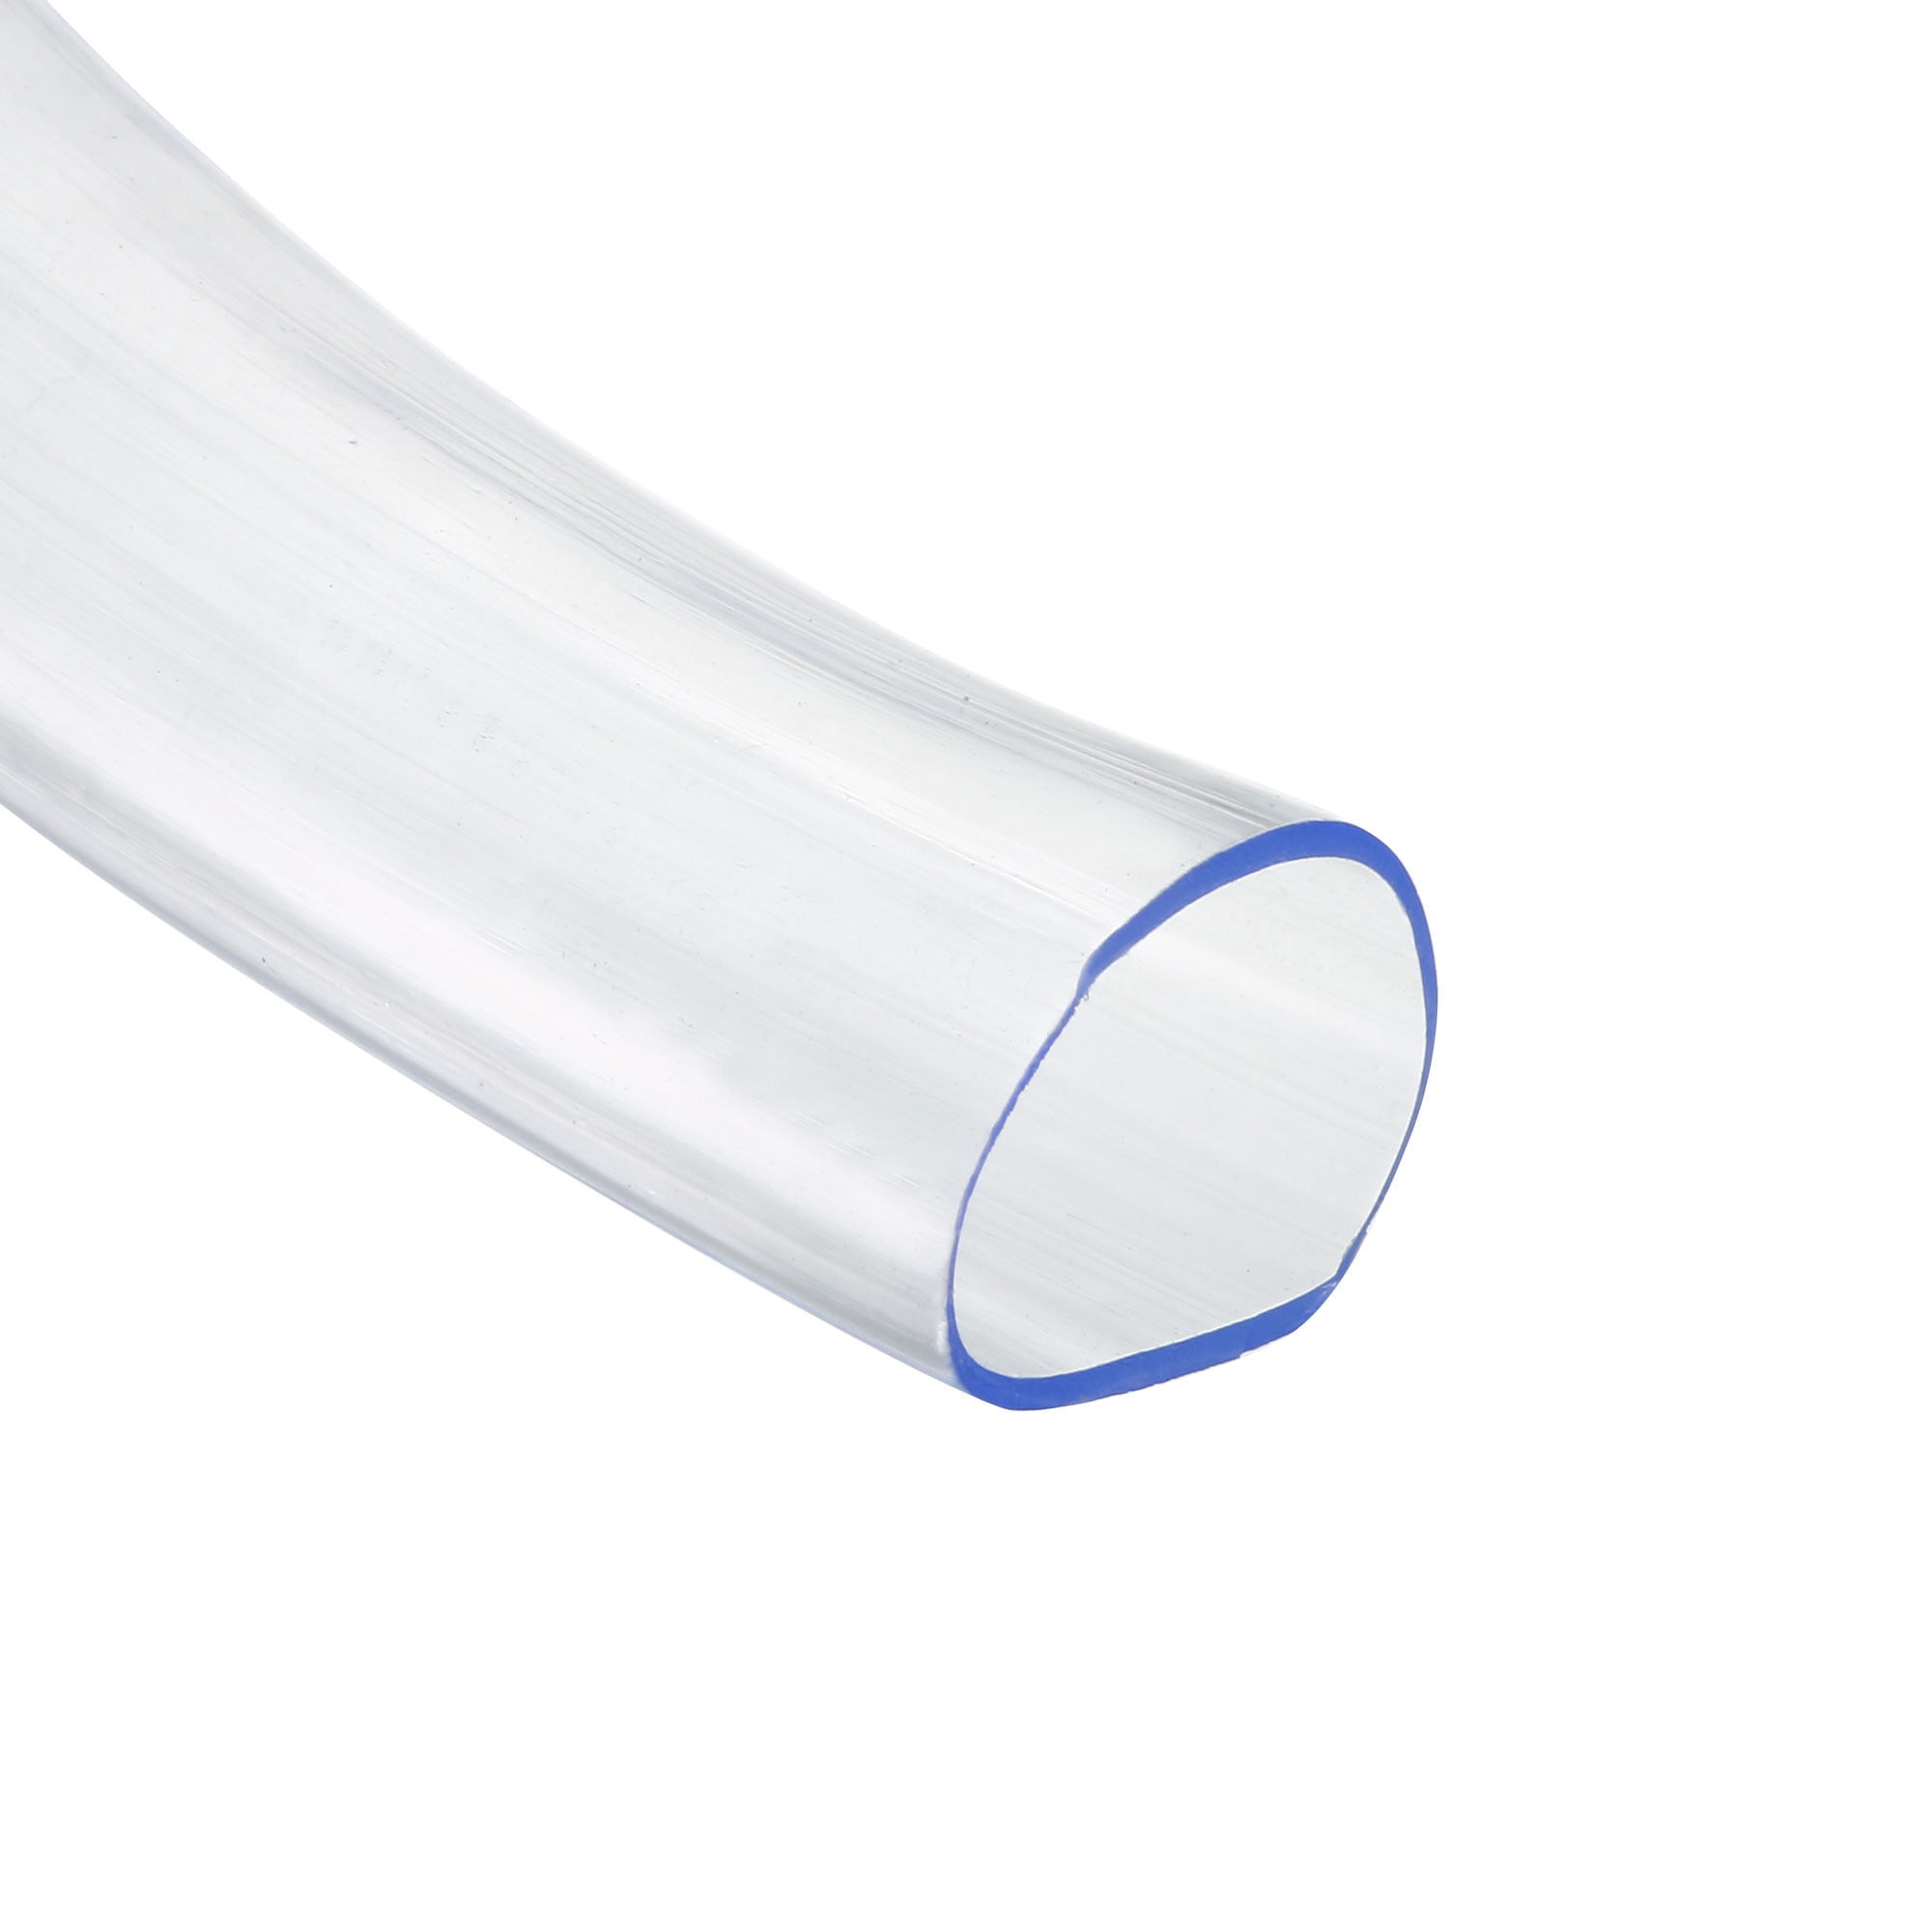 5/8" I.D CLEAR VINYL TUBING SOLD "BY THE FOOT" 